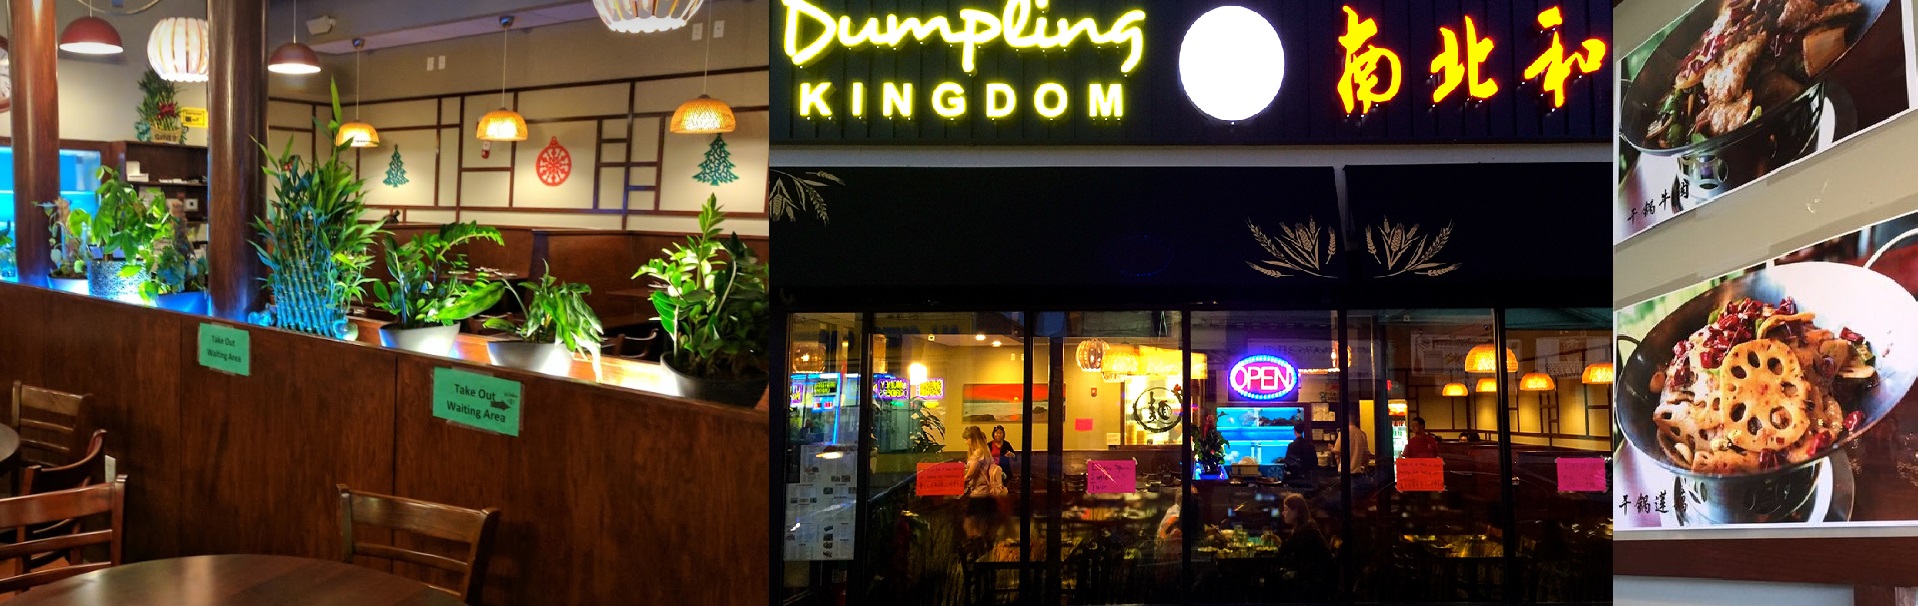 Your favorite Chinese food at Dumpling Kingdom